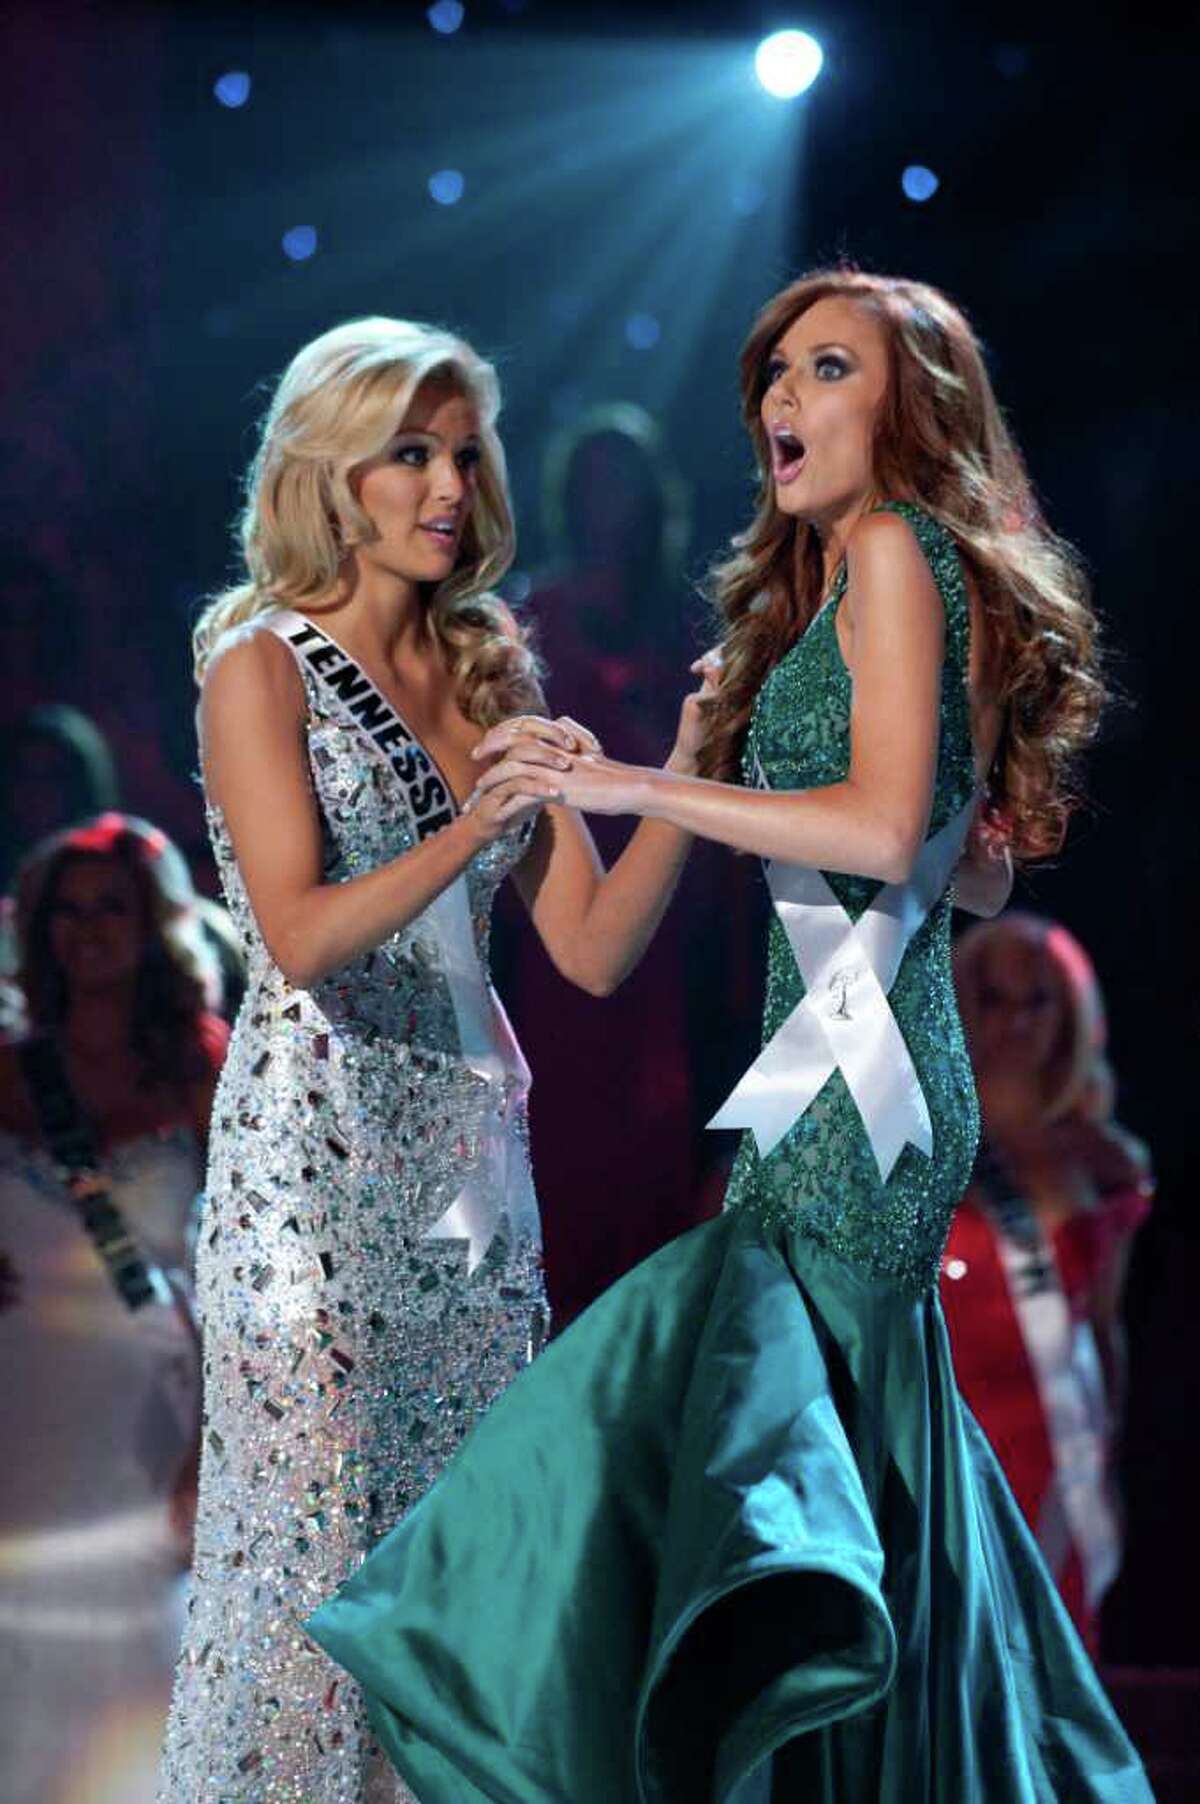 Miss Tennessee USA 2011, Ashley Durham is first runner up as Miss California USA 2011, Alyssa Campanella, is the winner of the 2011 MISS USA® Competition. She celebrates on stage after the crowning, which was broadcast LIVE on NBC from the Planet Hollywood Resort & Casino Theatre for the Performing Arts, in Las Vegas, Nevada on Sunday, June 19, 2011. The winner will compete in the 2011 MISS UNIVERSE® Pageant in Sao Paulo, Brazil on September 12.